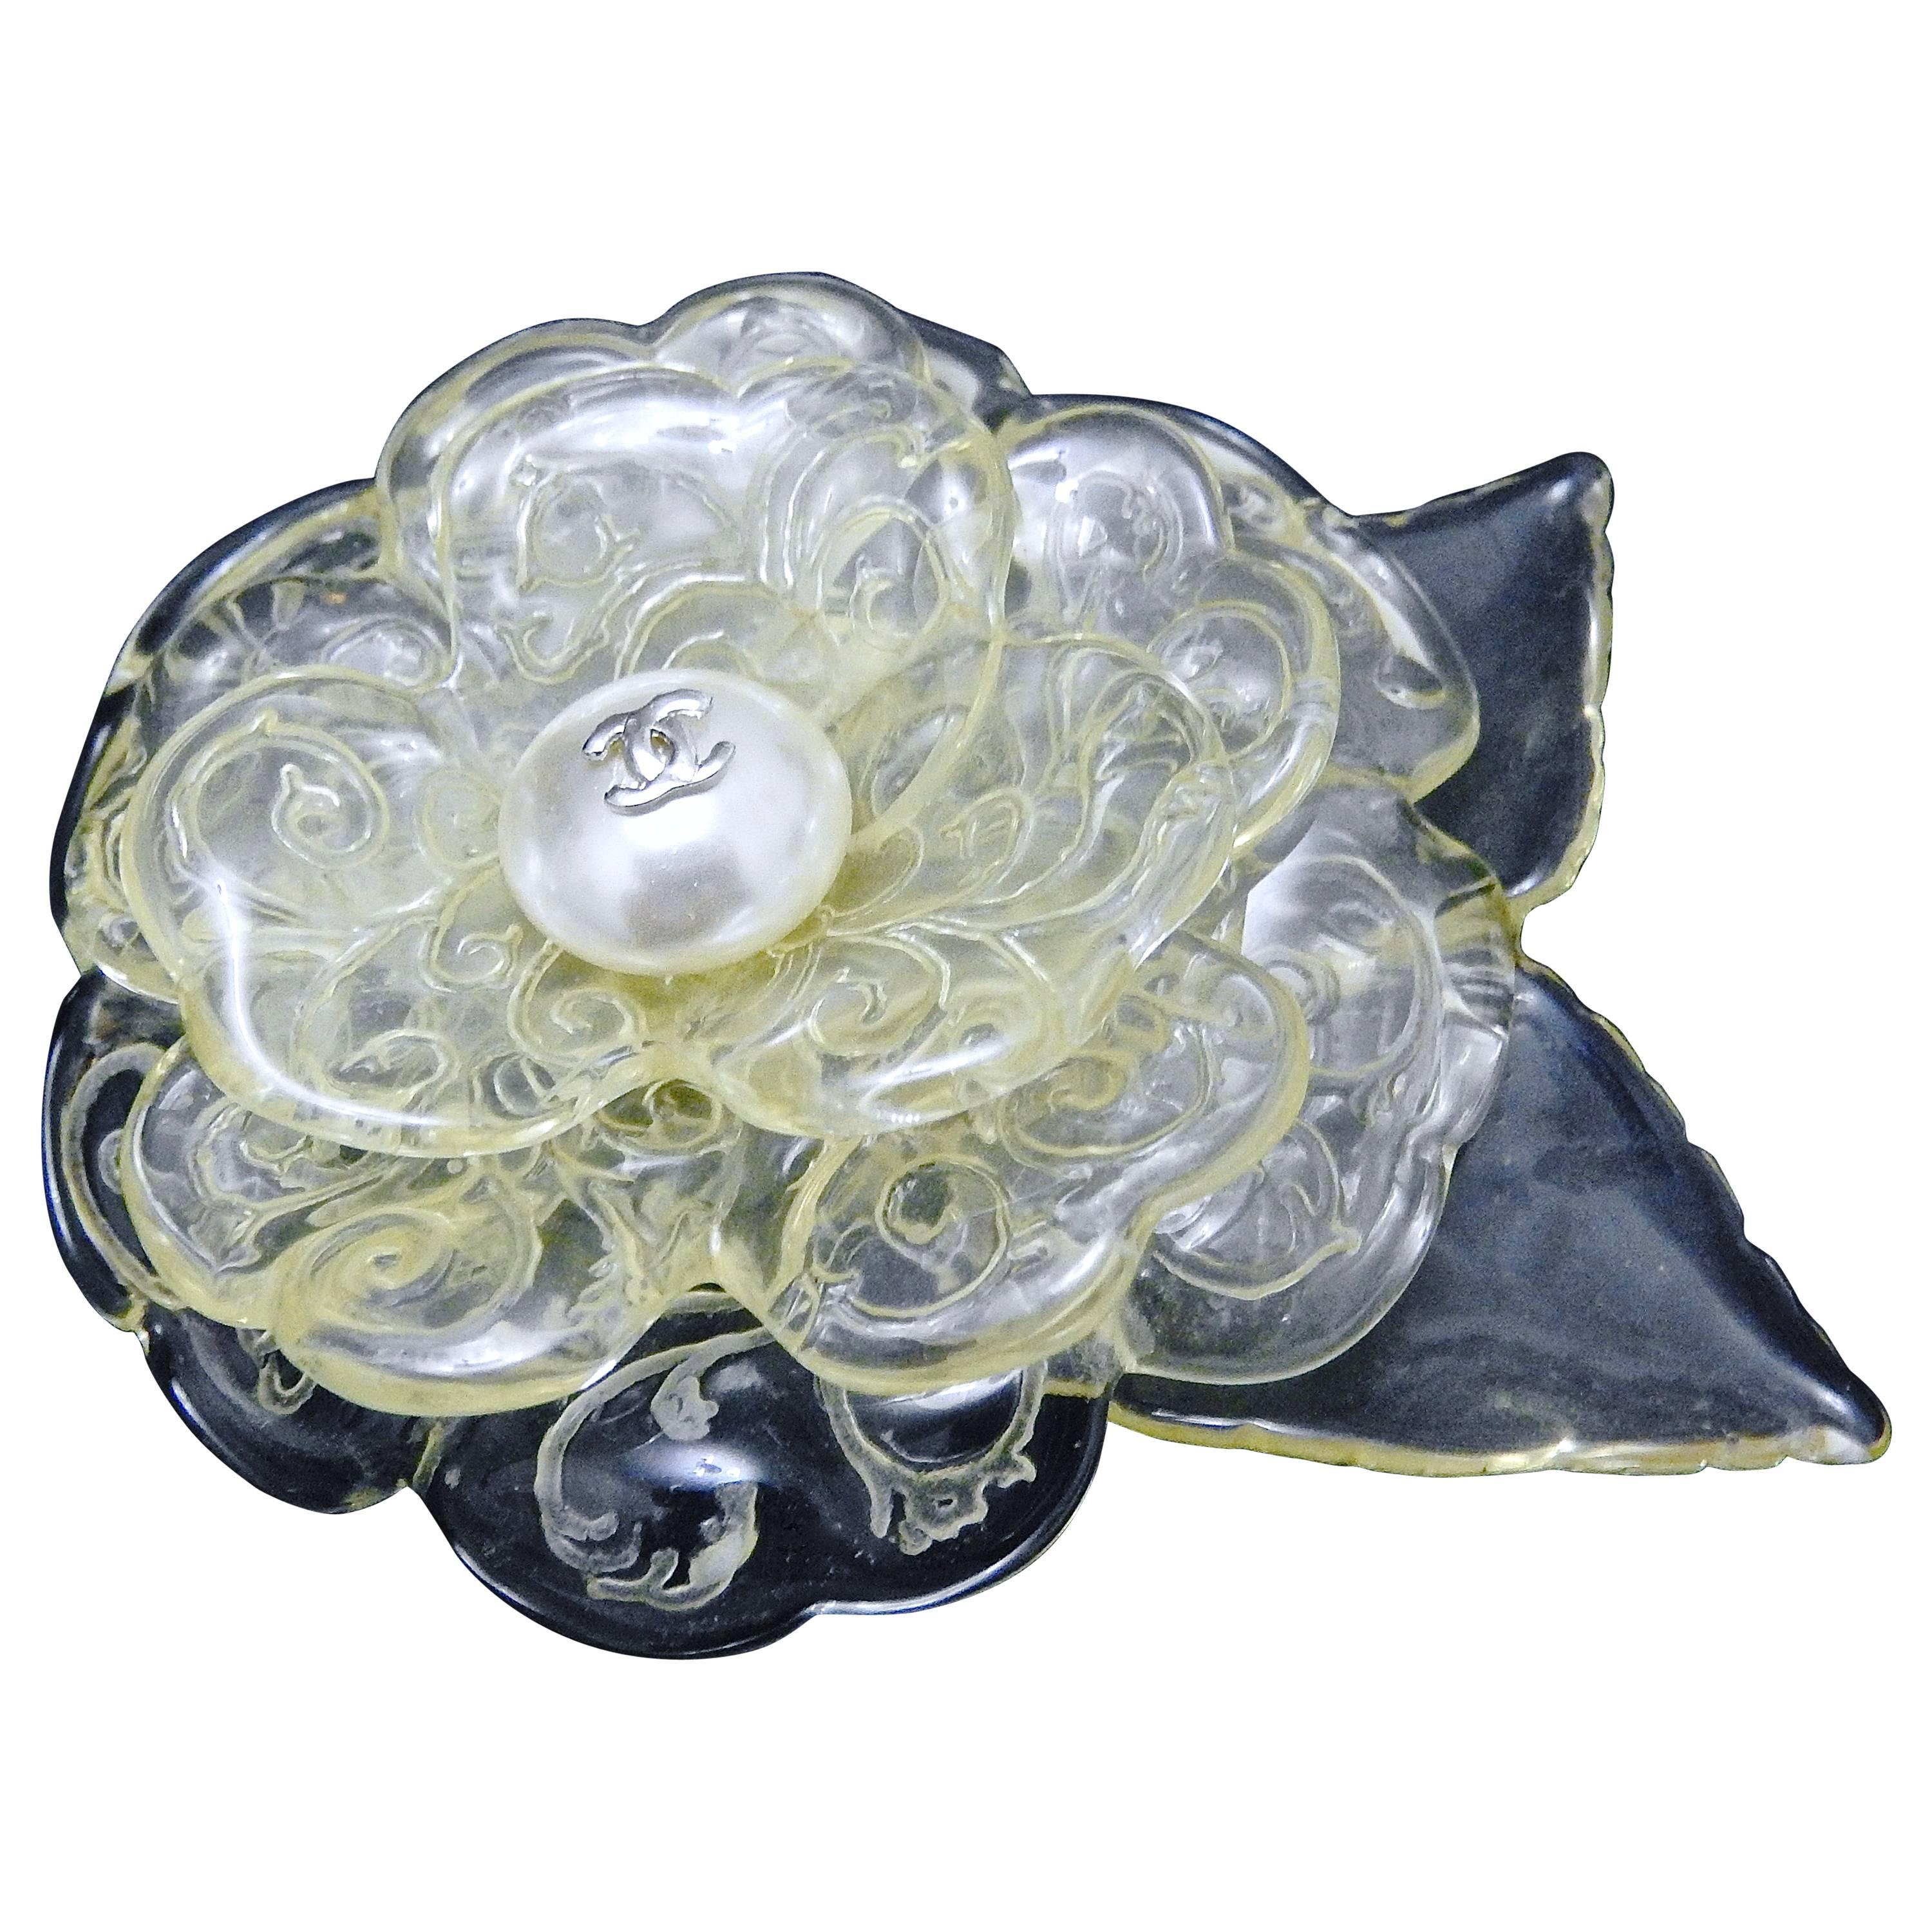 I personally love camellias from this series for their so elegant etched flowers on lucite camellia petals, and is great to go with any deep colored clothing, such as black, blue, red, purple, green etc,.
The color of the acrylic petals had turned